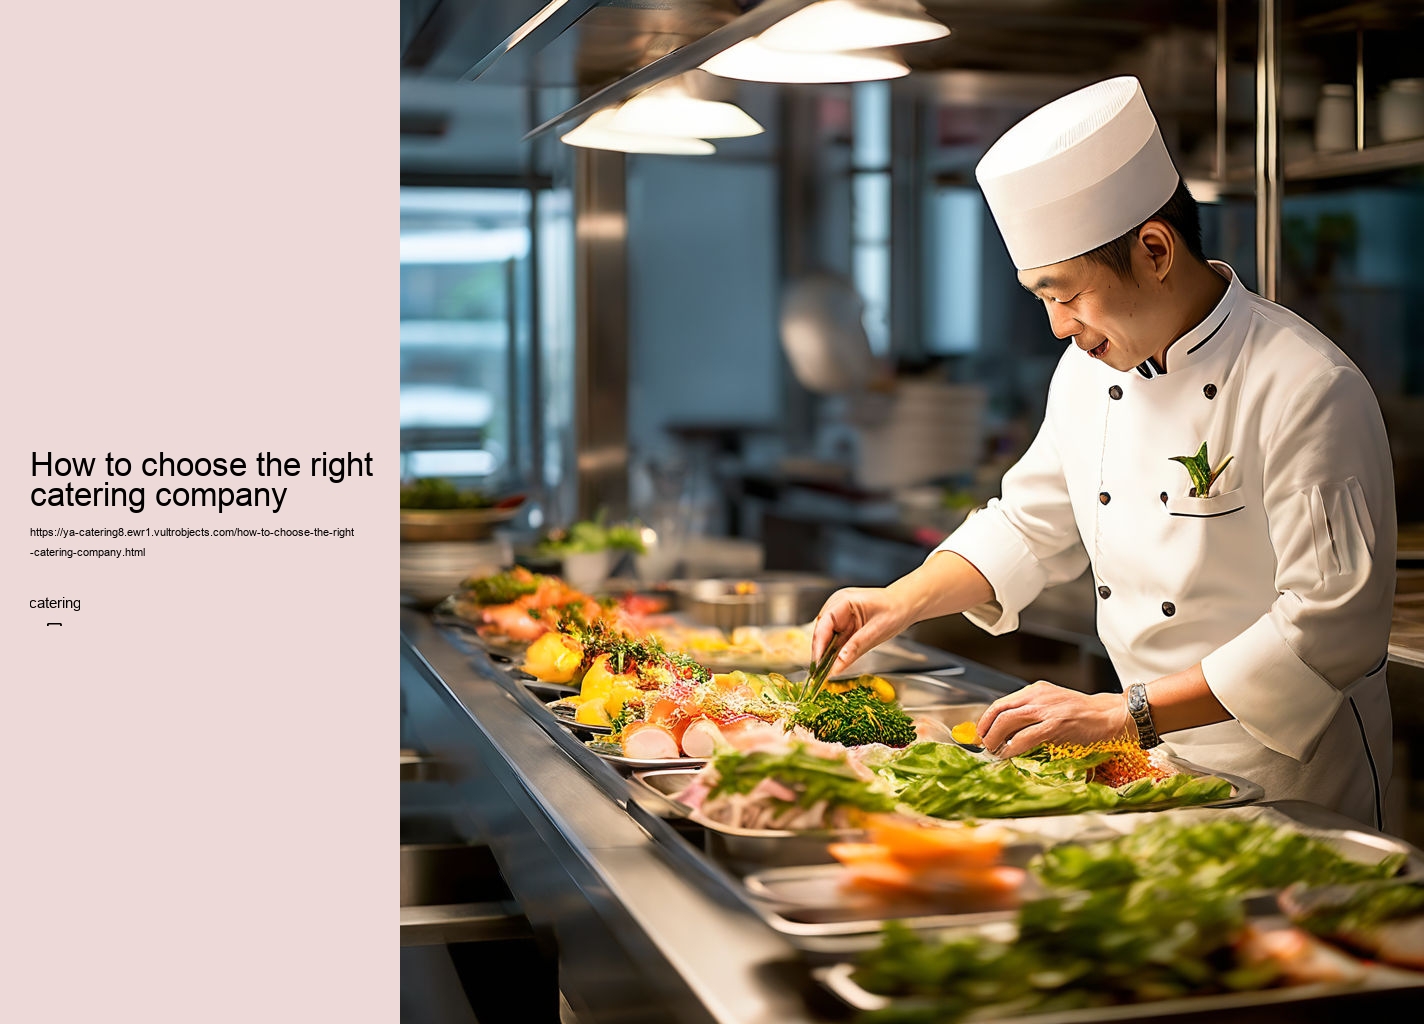 How to choose the right catering company